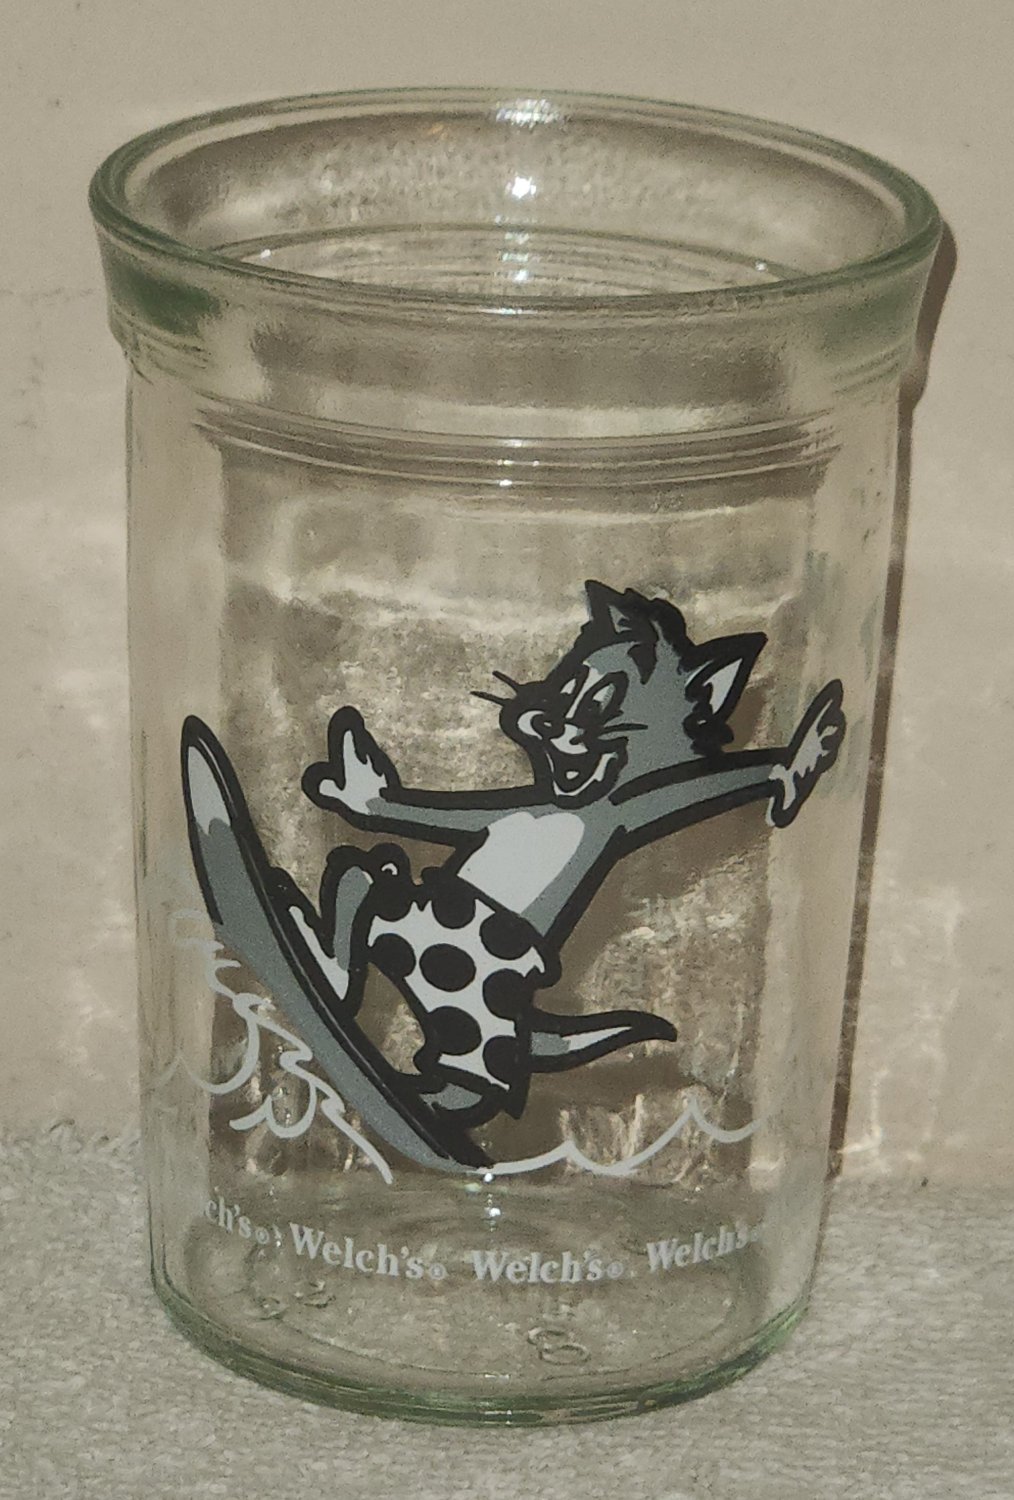 Tom & Jerry 4 Inch Welch's Clear Glass Jar Surfing 1990 Turner Entertainment